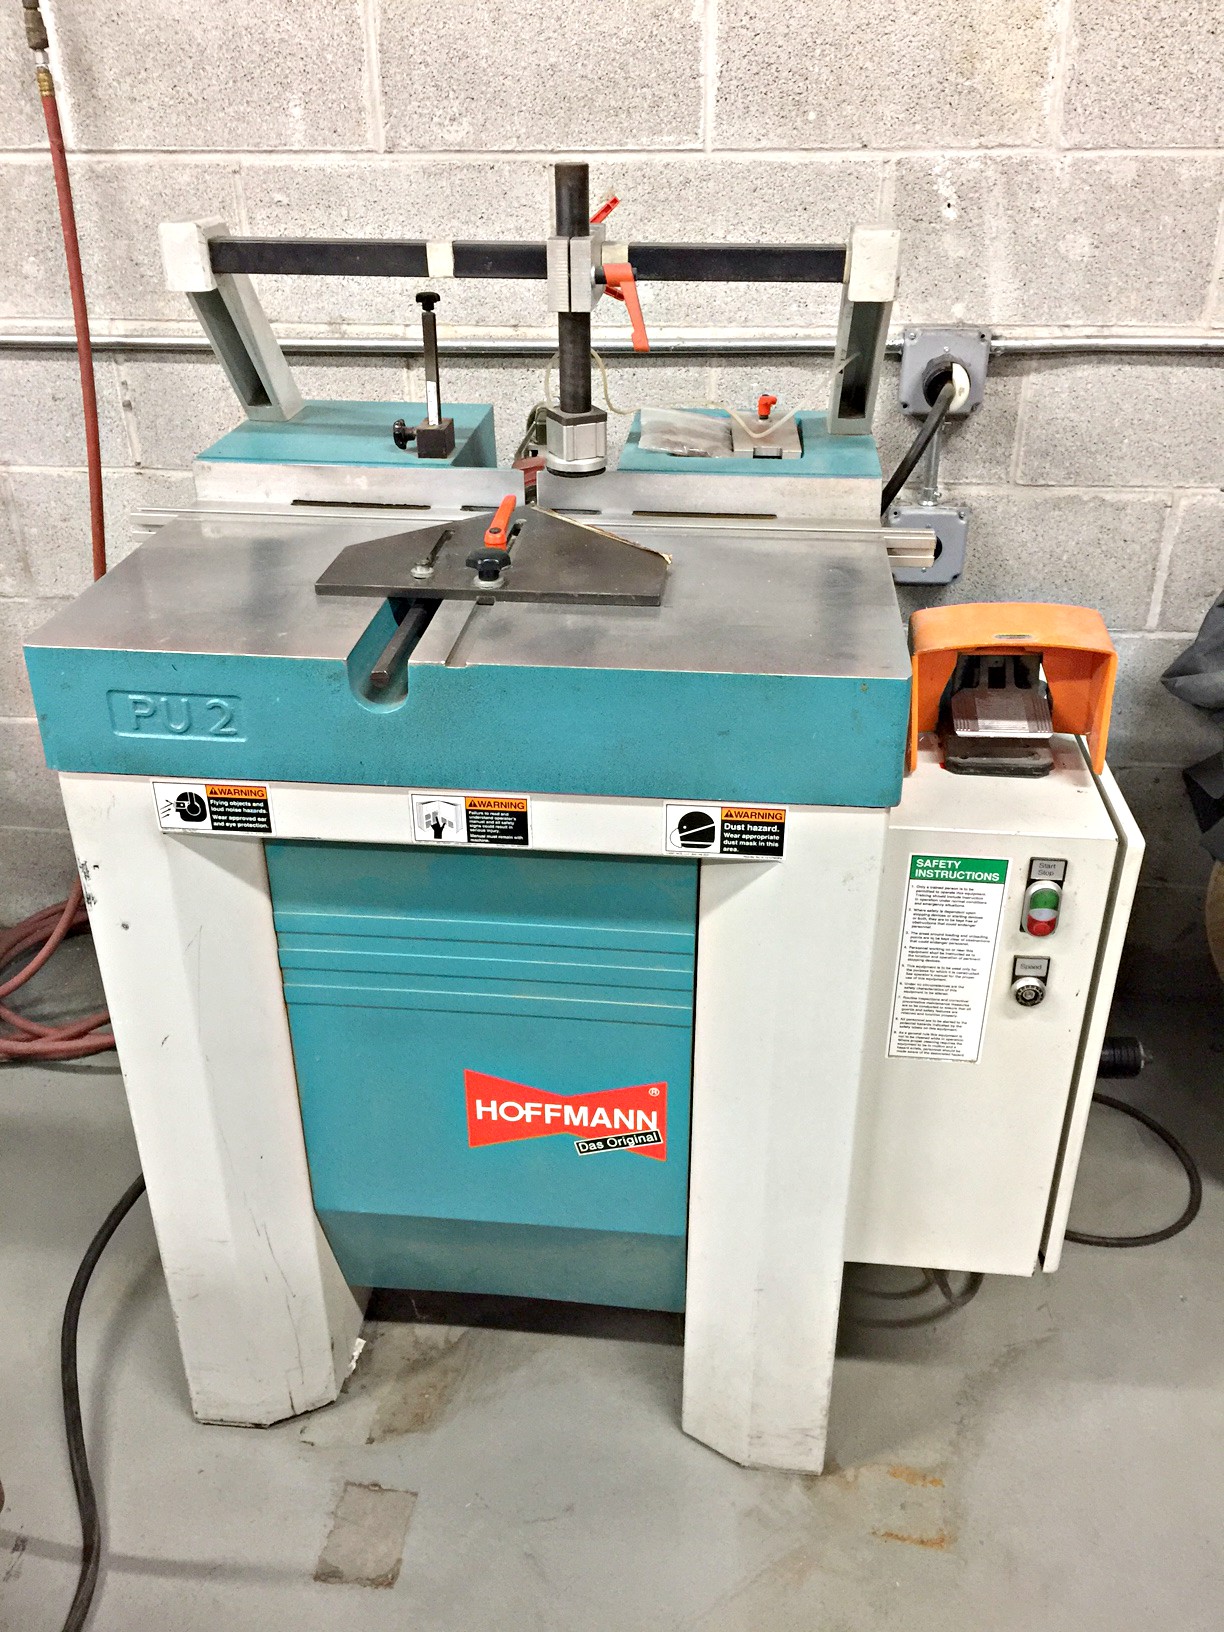 Hoffmann PU2 Dovetail Routing Machine (used) Item # UFE-S128